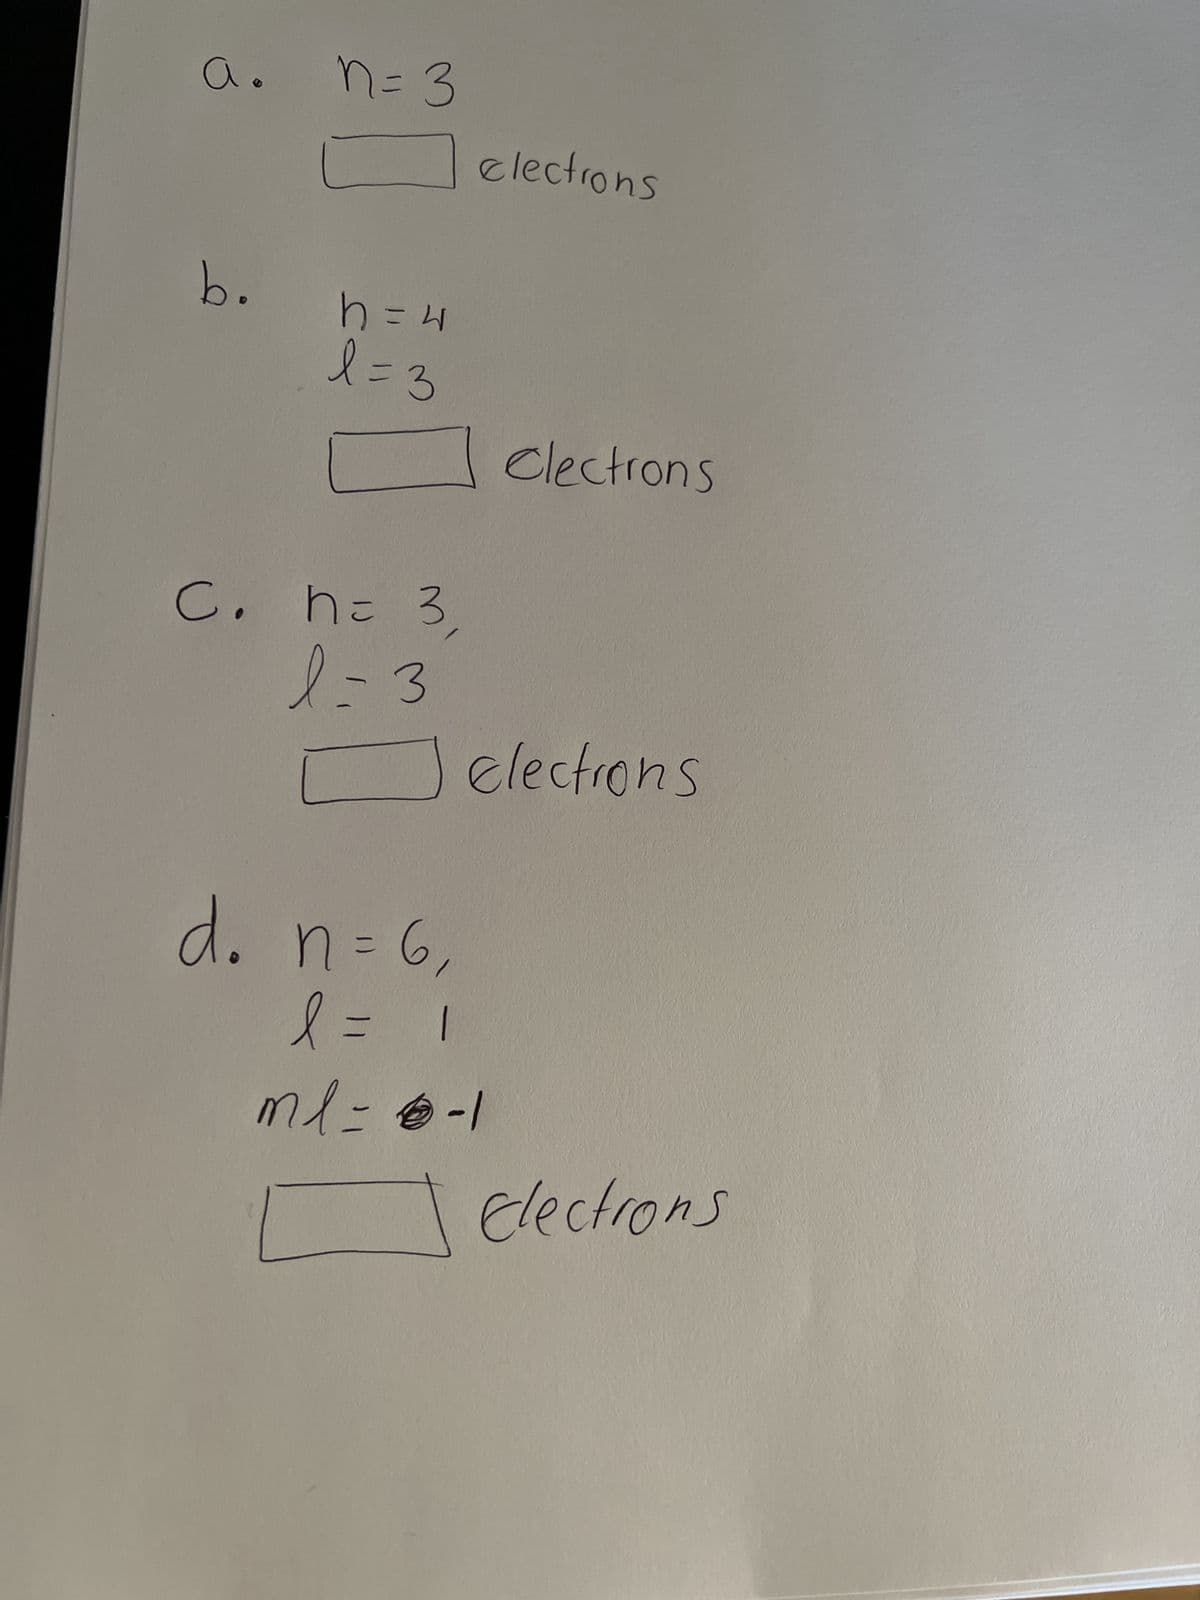 a.
b.
n = 3
h = 4
l = 3
C. h= 3,
l=3
d. n=6,
l = 1
electrons
Clectrons
electrons
ml = 6-1
Elections